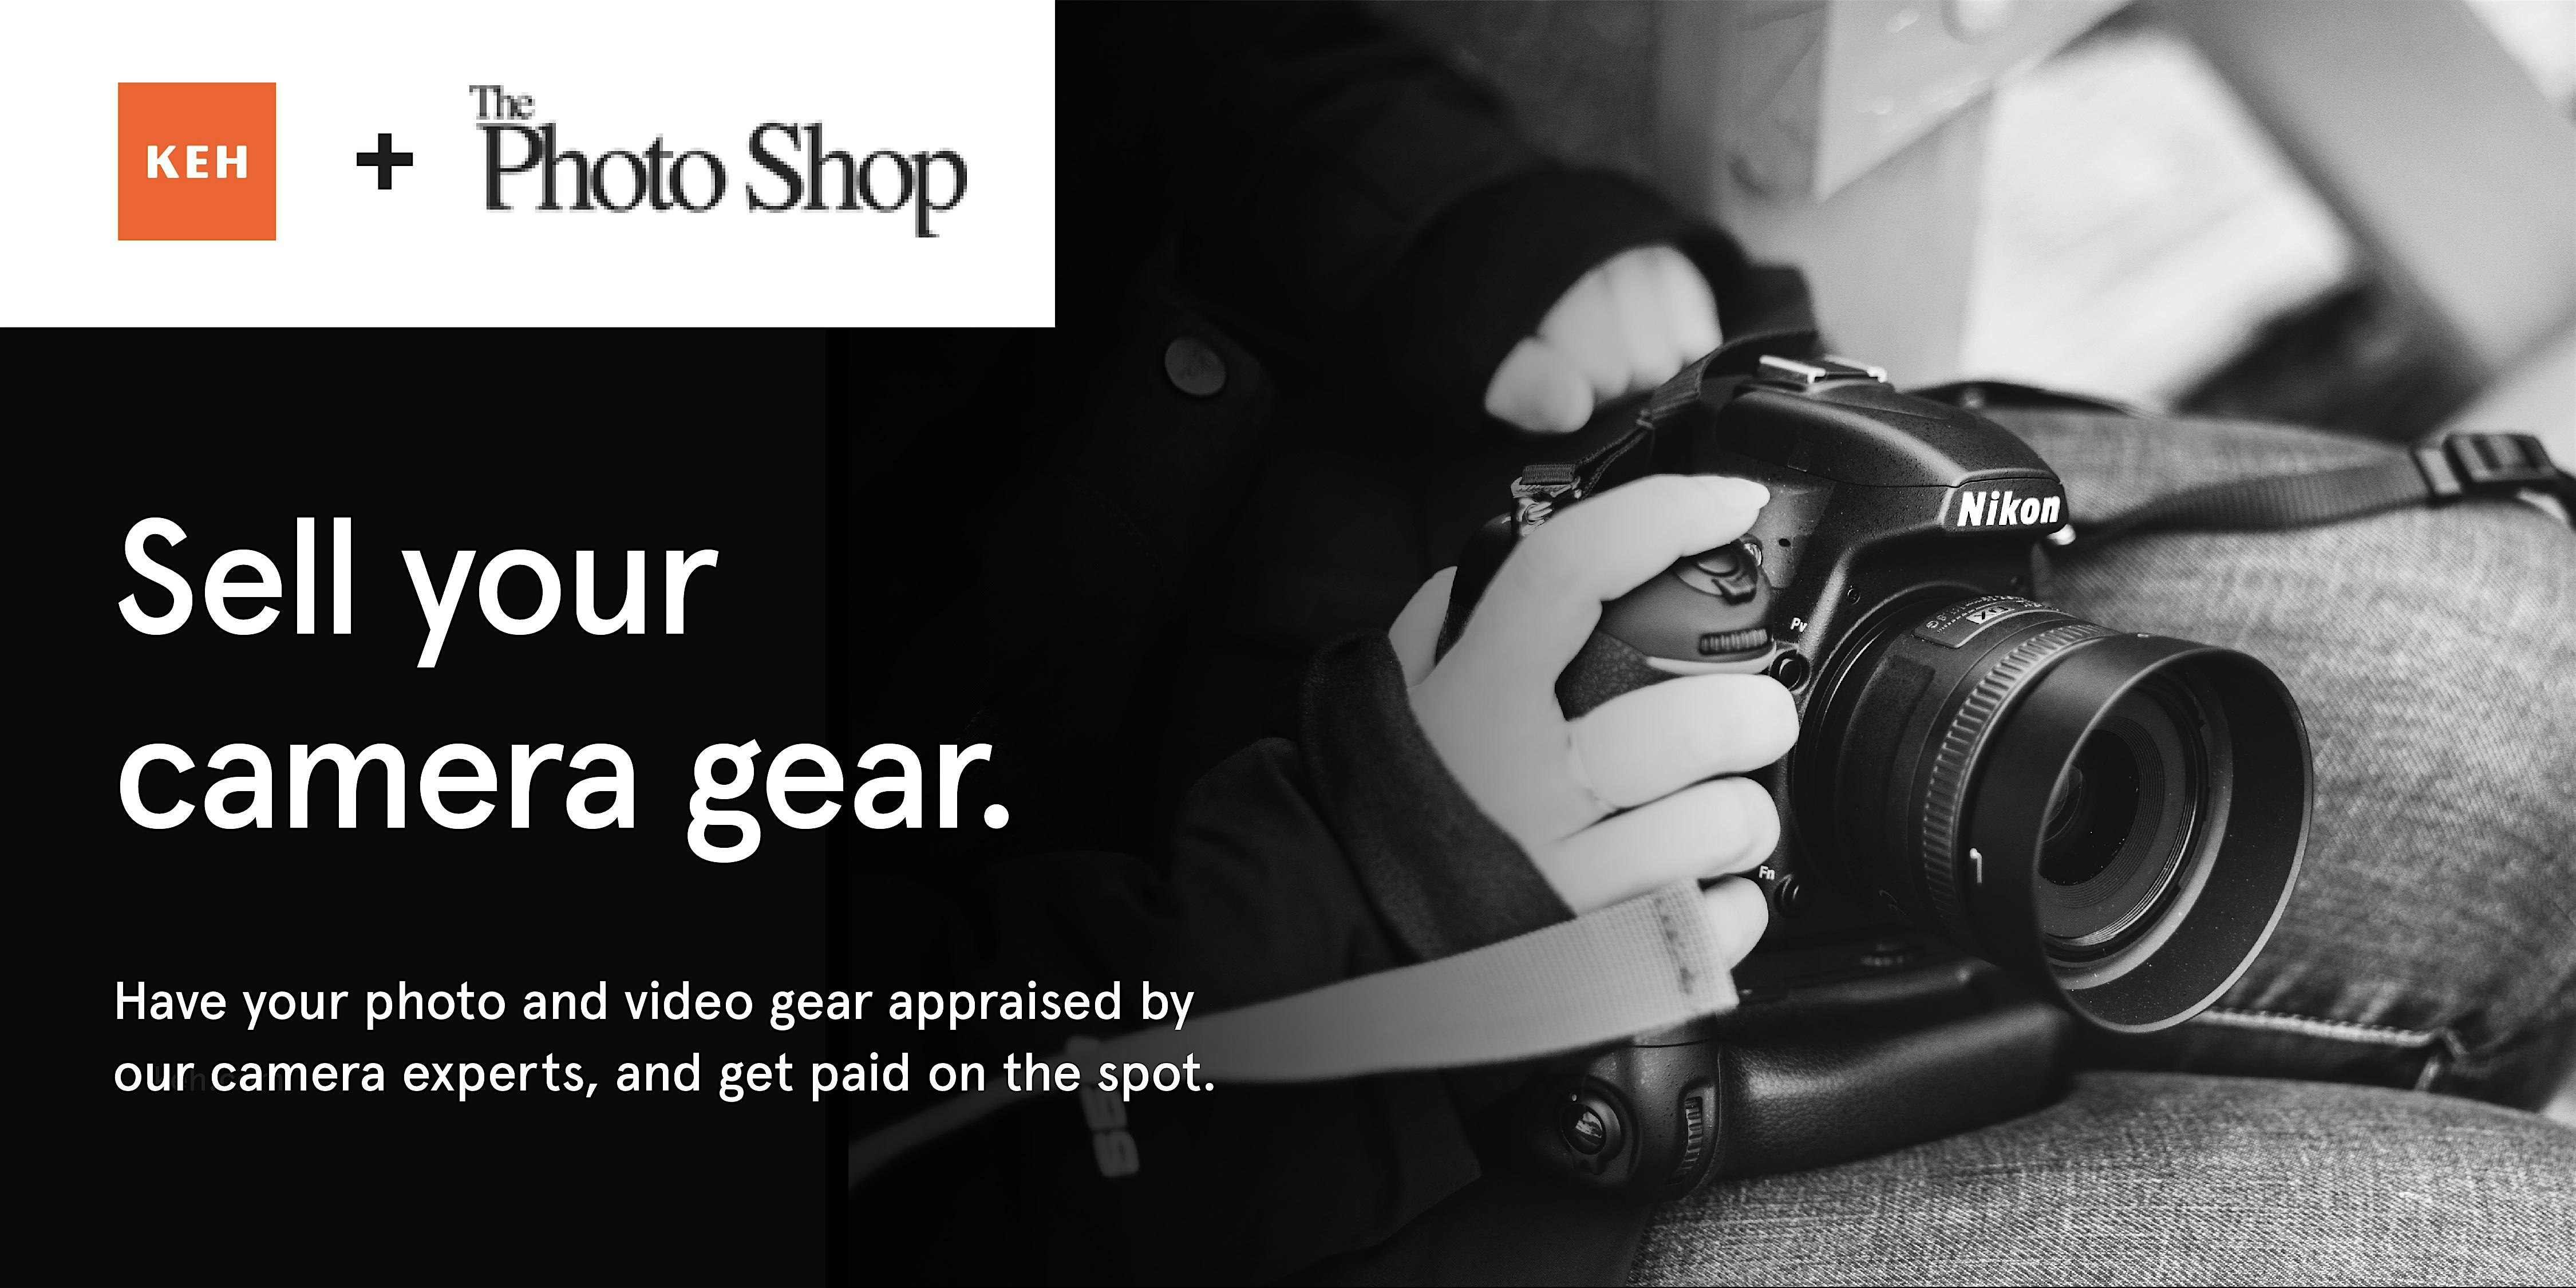 Sell your camera gear (free event) at The Photo Shop